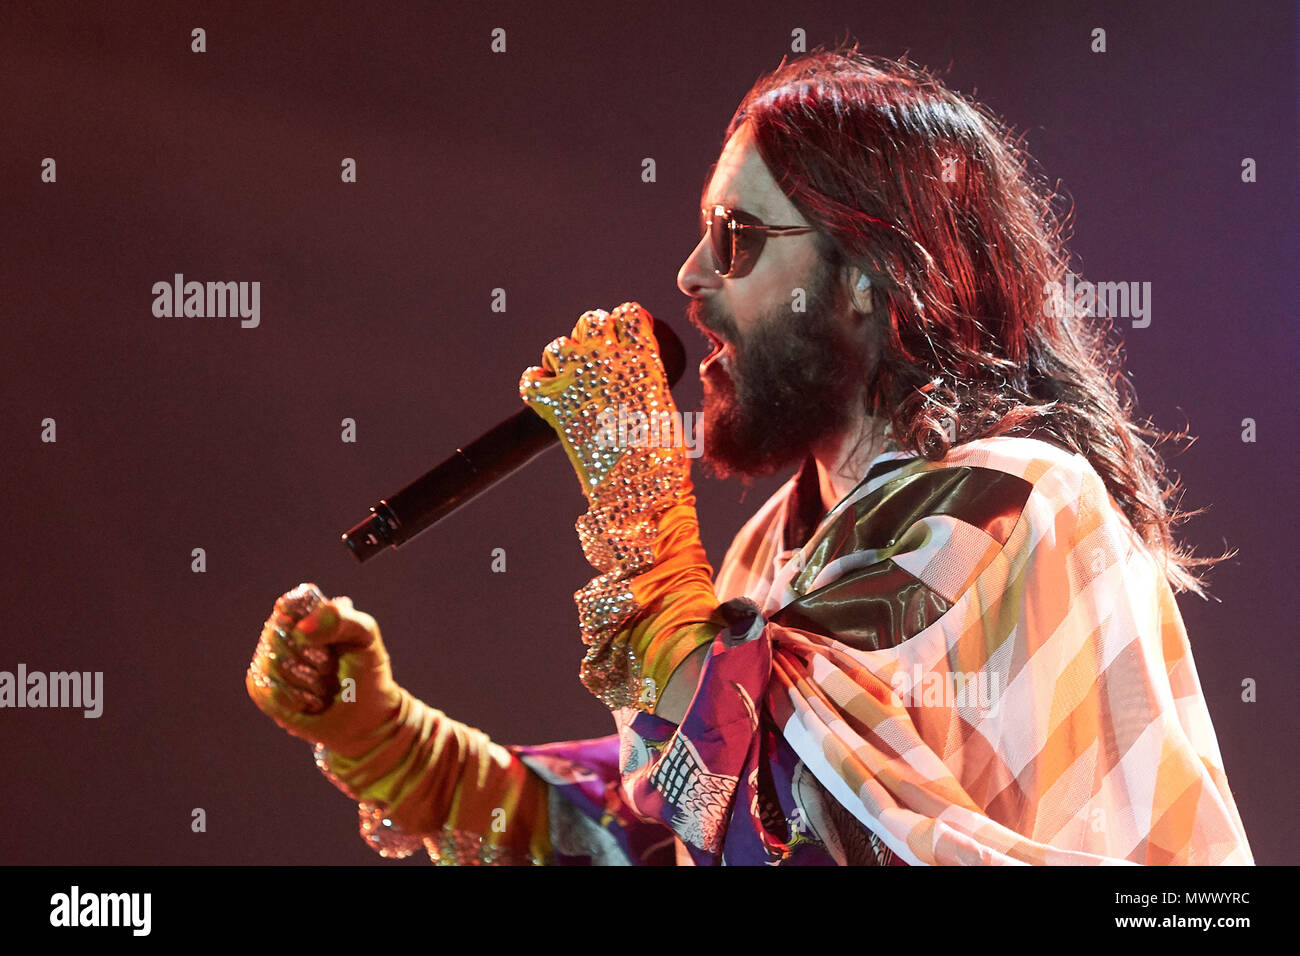 Nuerburg, Germany. 2nd June 2018. Jared Leto performs with his band '30  Seconds To Mars' on the main stage of the music festival 'Rock am Ring',  which features 80 bands on 3